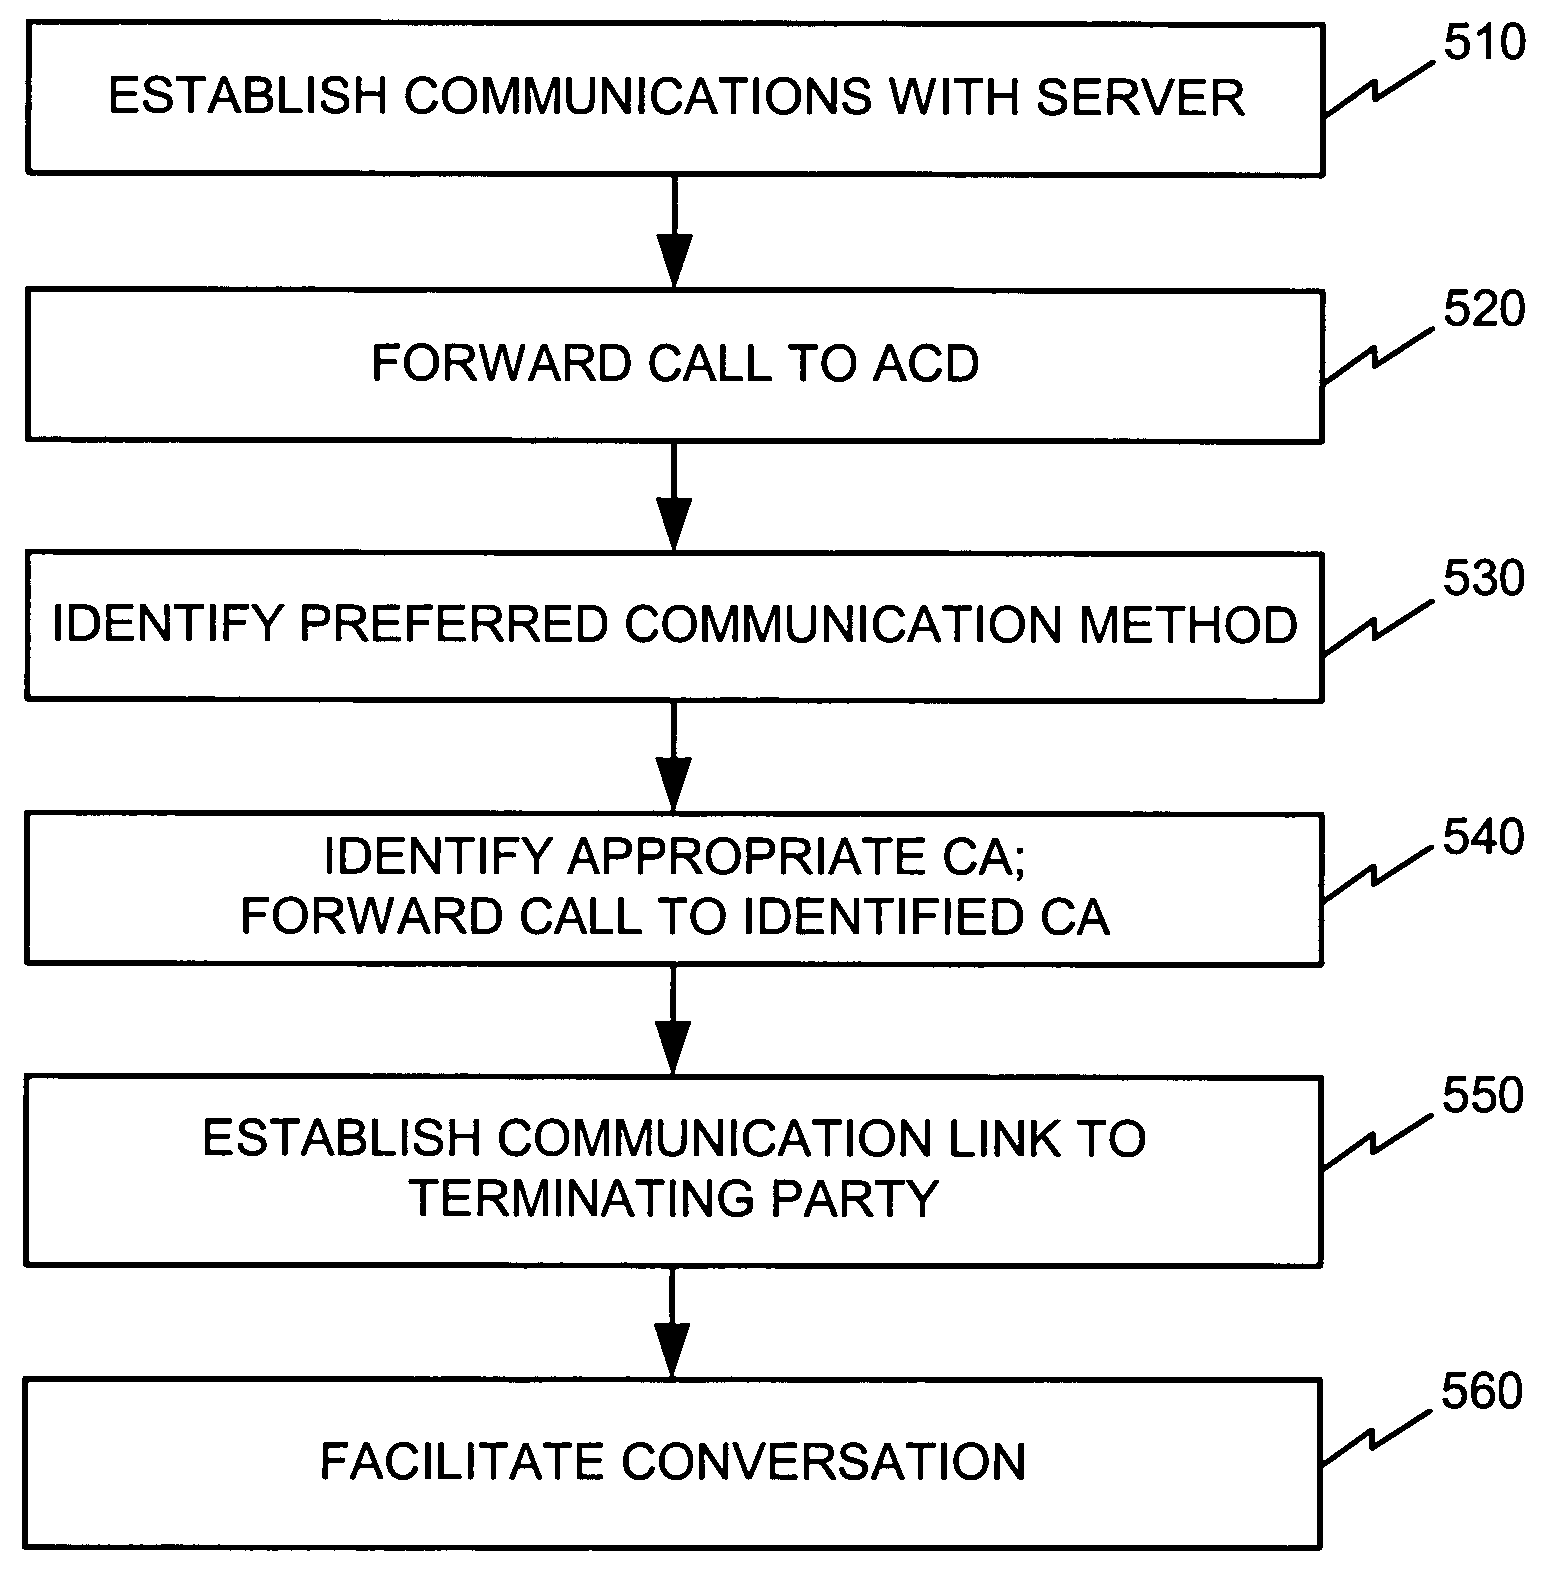 Systems and methods for facilitating communications involving hearing-impaired parties